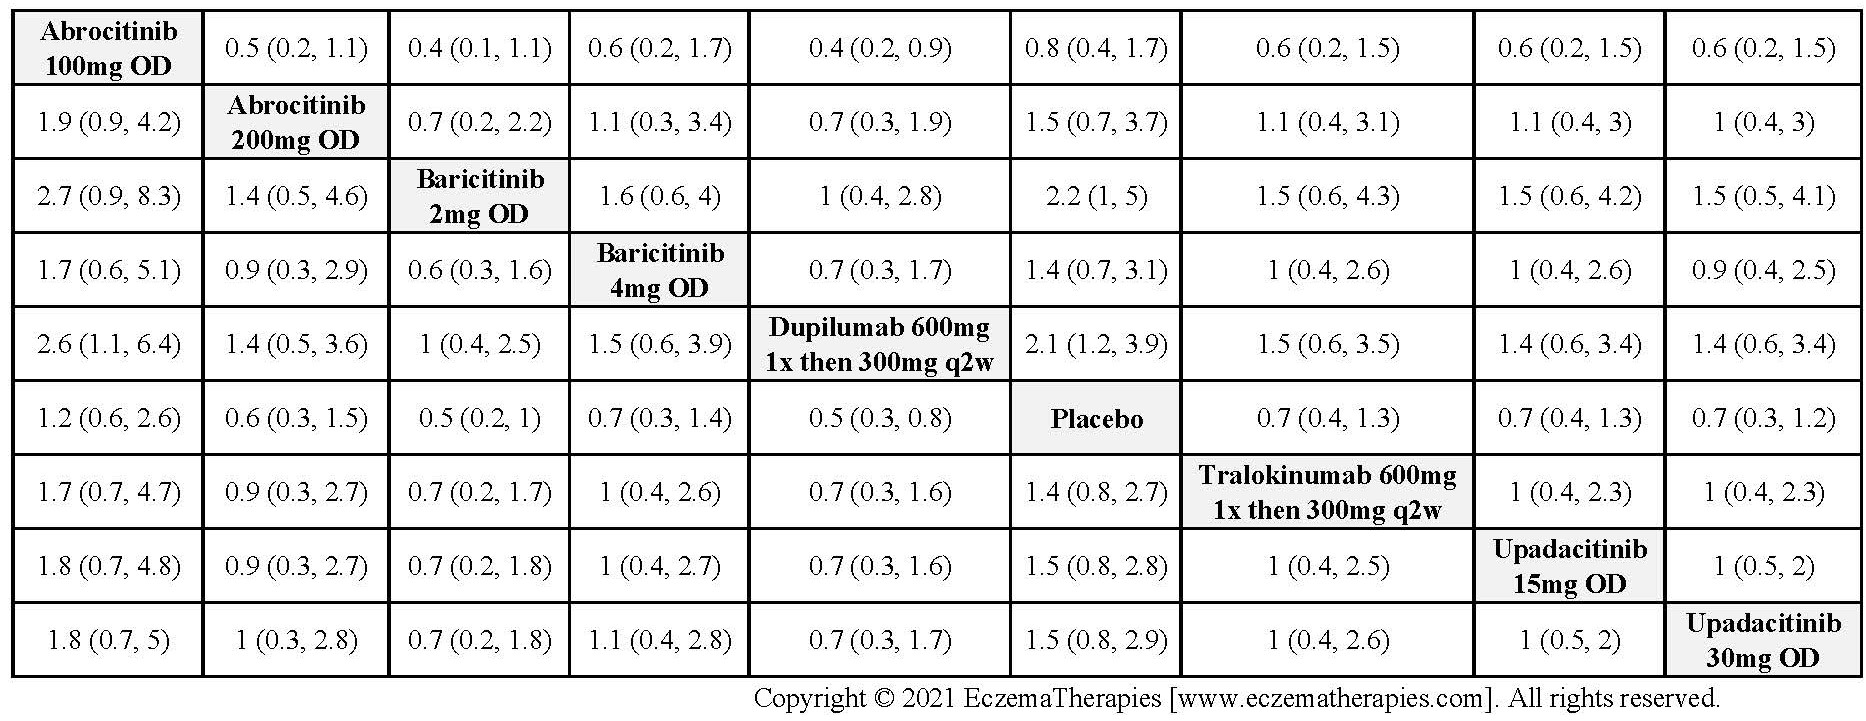 League table with relative effect estimates for serious adverse events up to 16 weeks of treatment for selected medications and placebo in adults